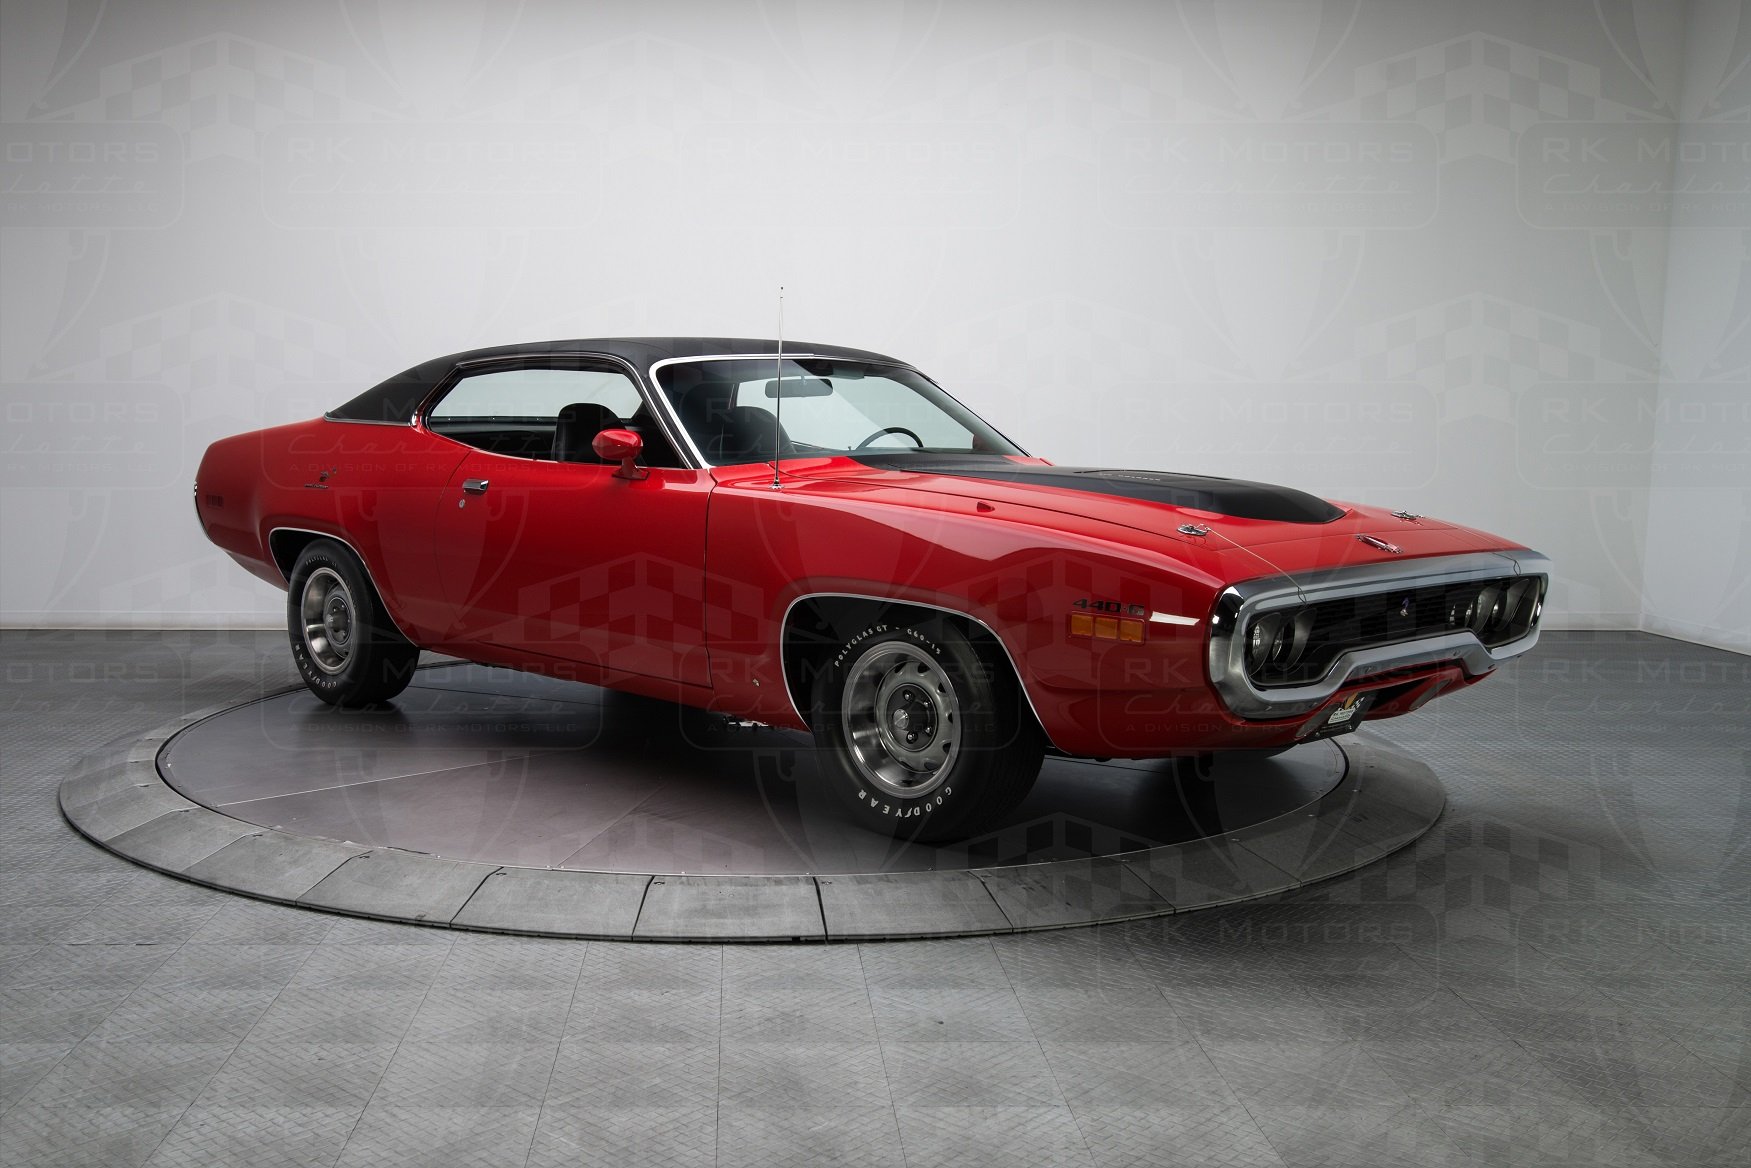 1971 Plymouth Road Runner cars coupe red wallpaper | 1751x1168 ...